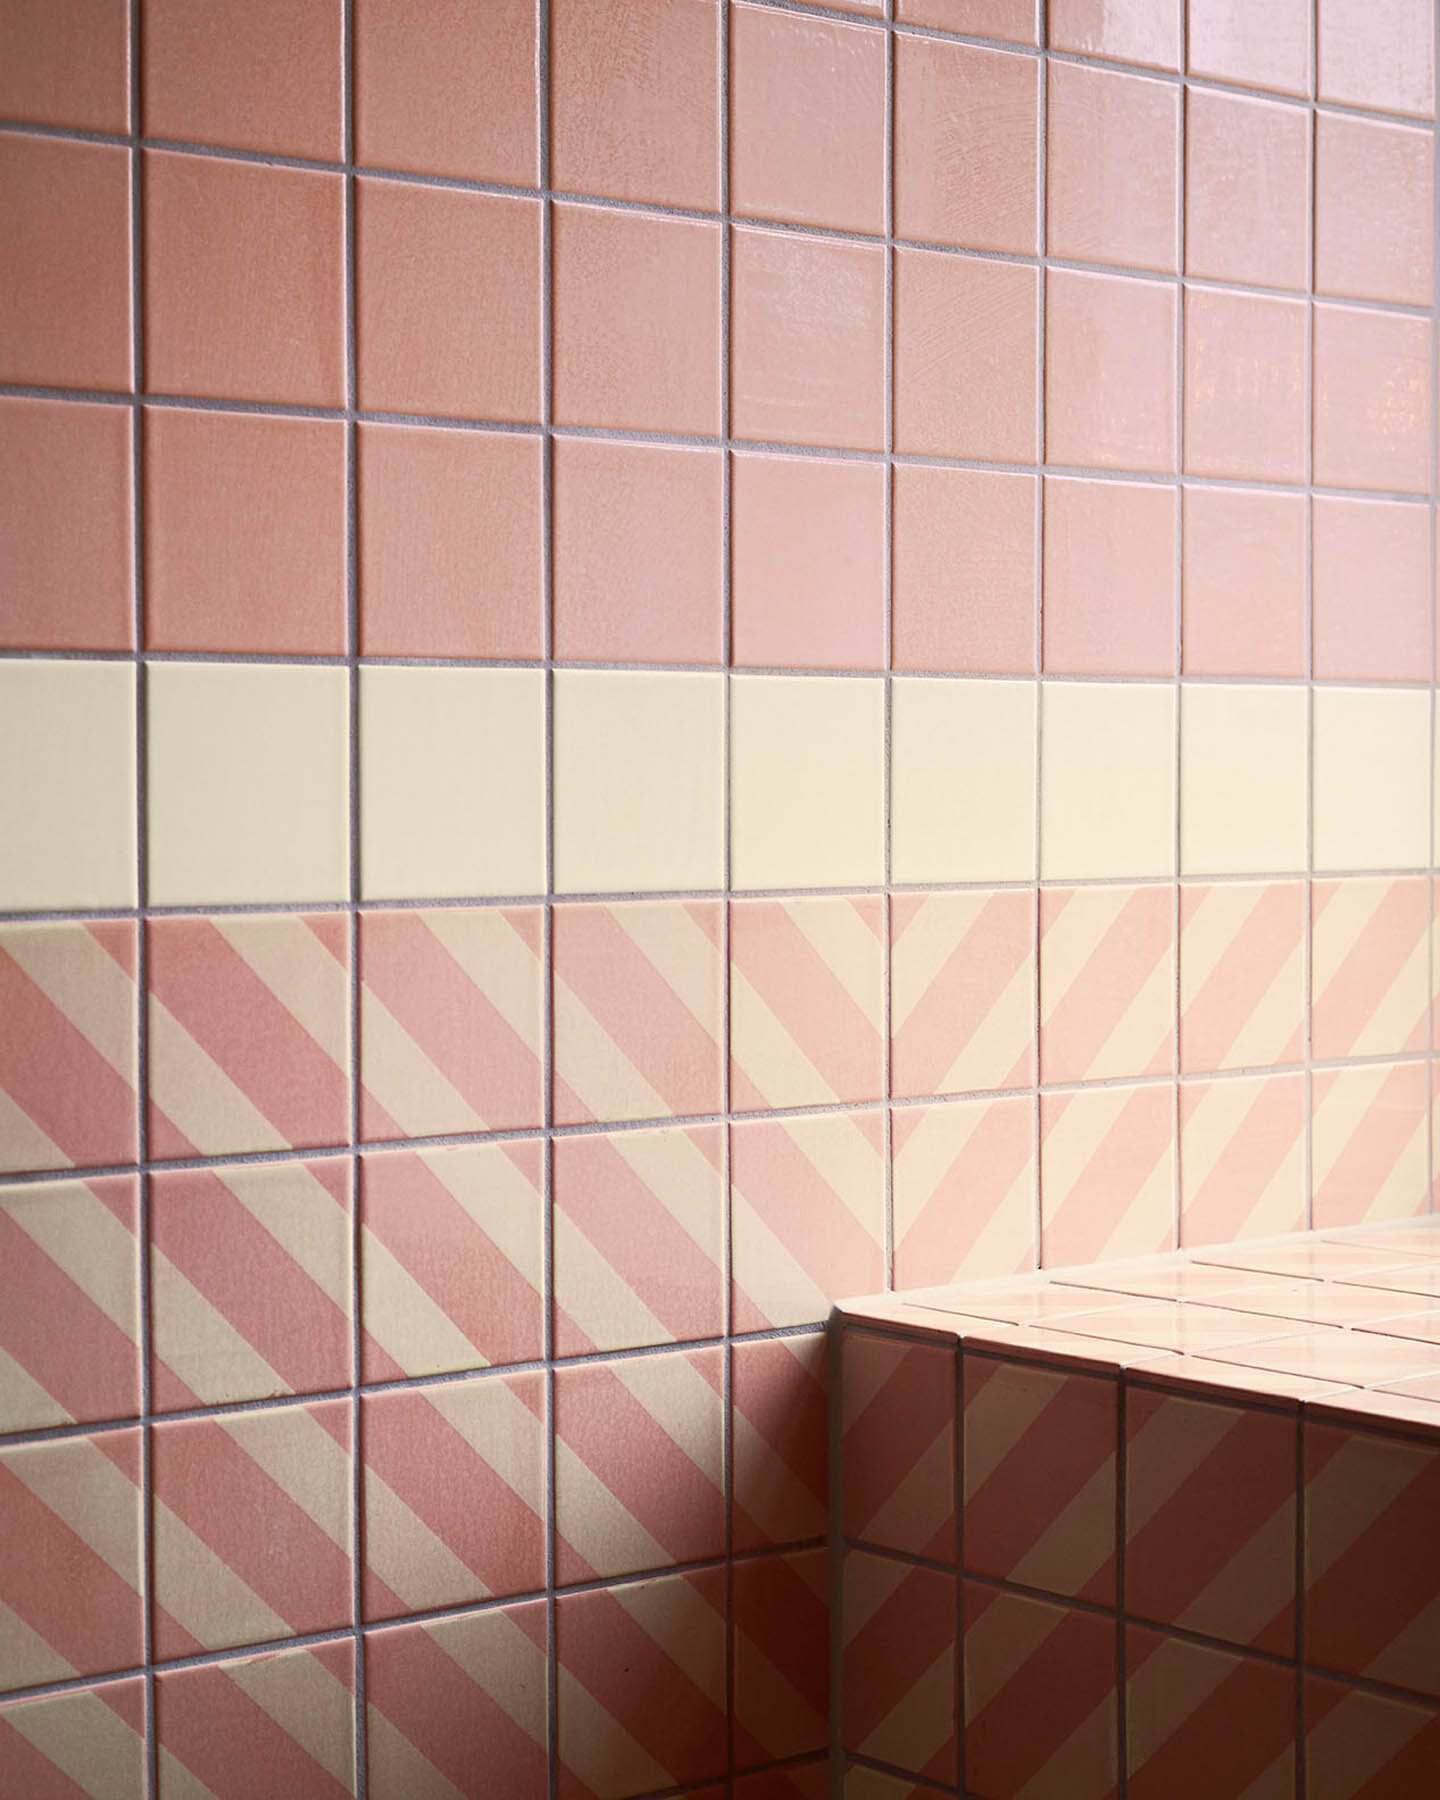 Bathroom wall with clay tiles in format 10x10x1 cm glazed with 'Dark Pink Champagne Matt'